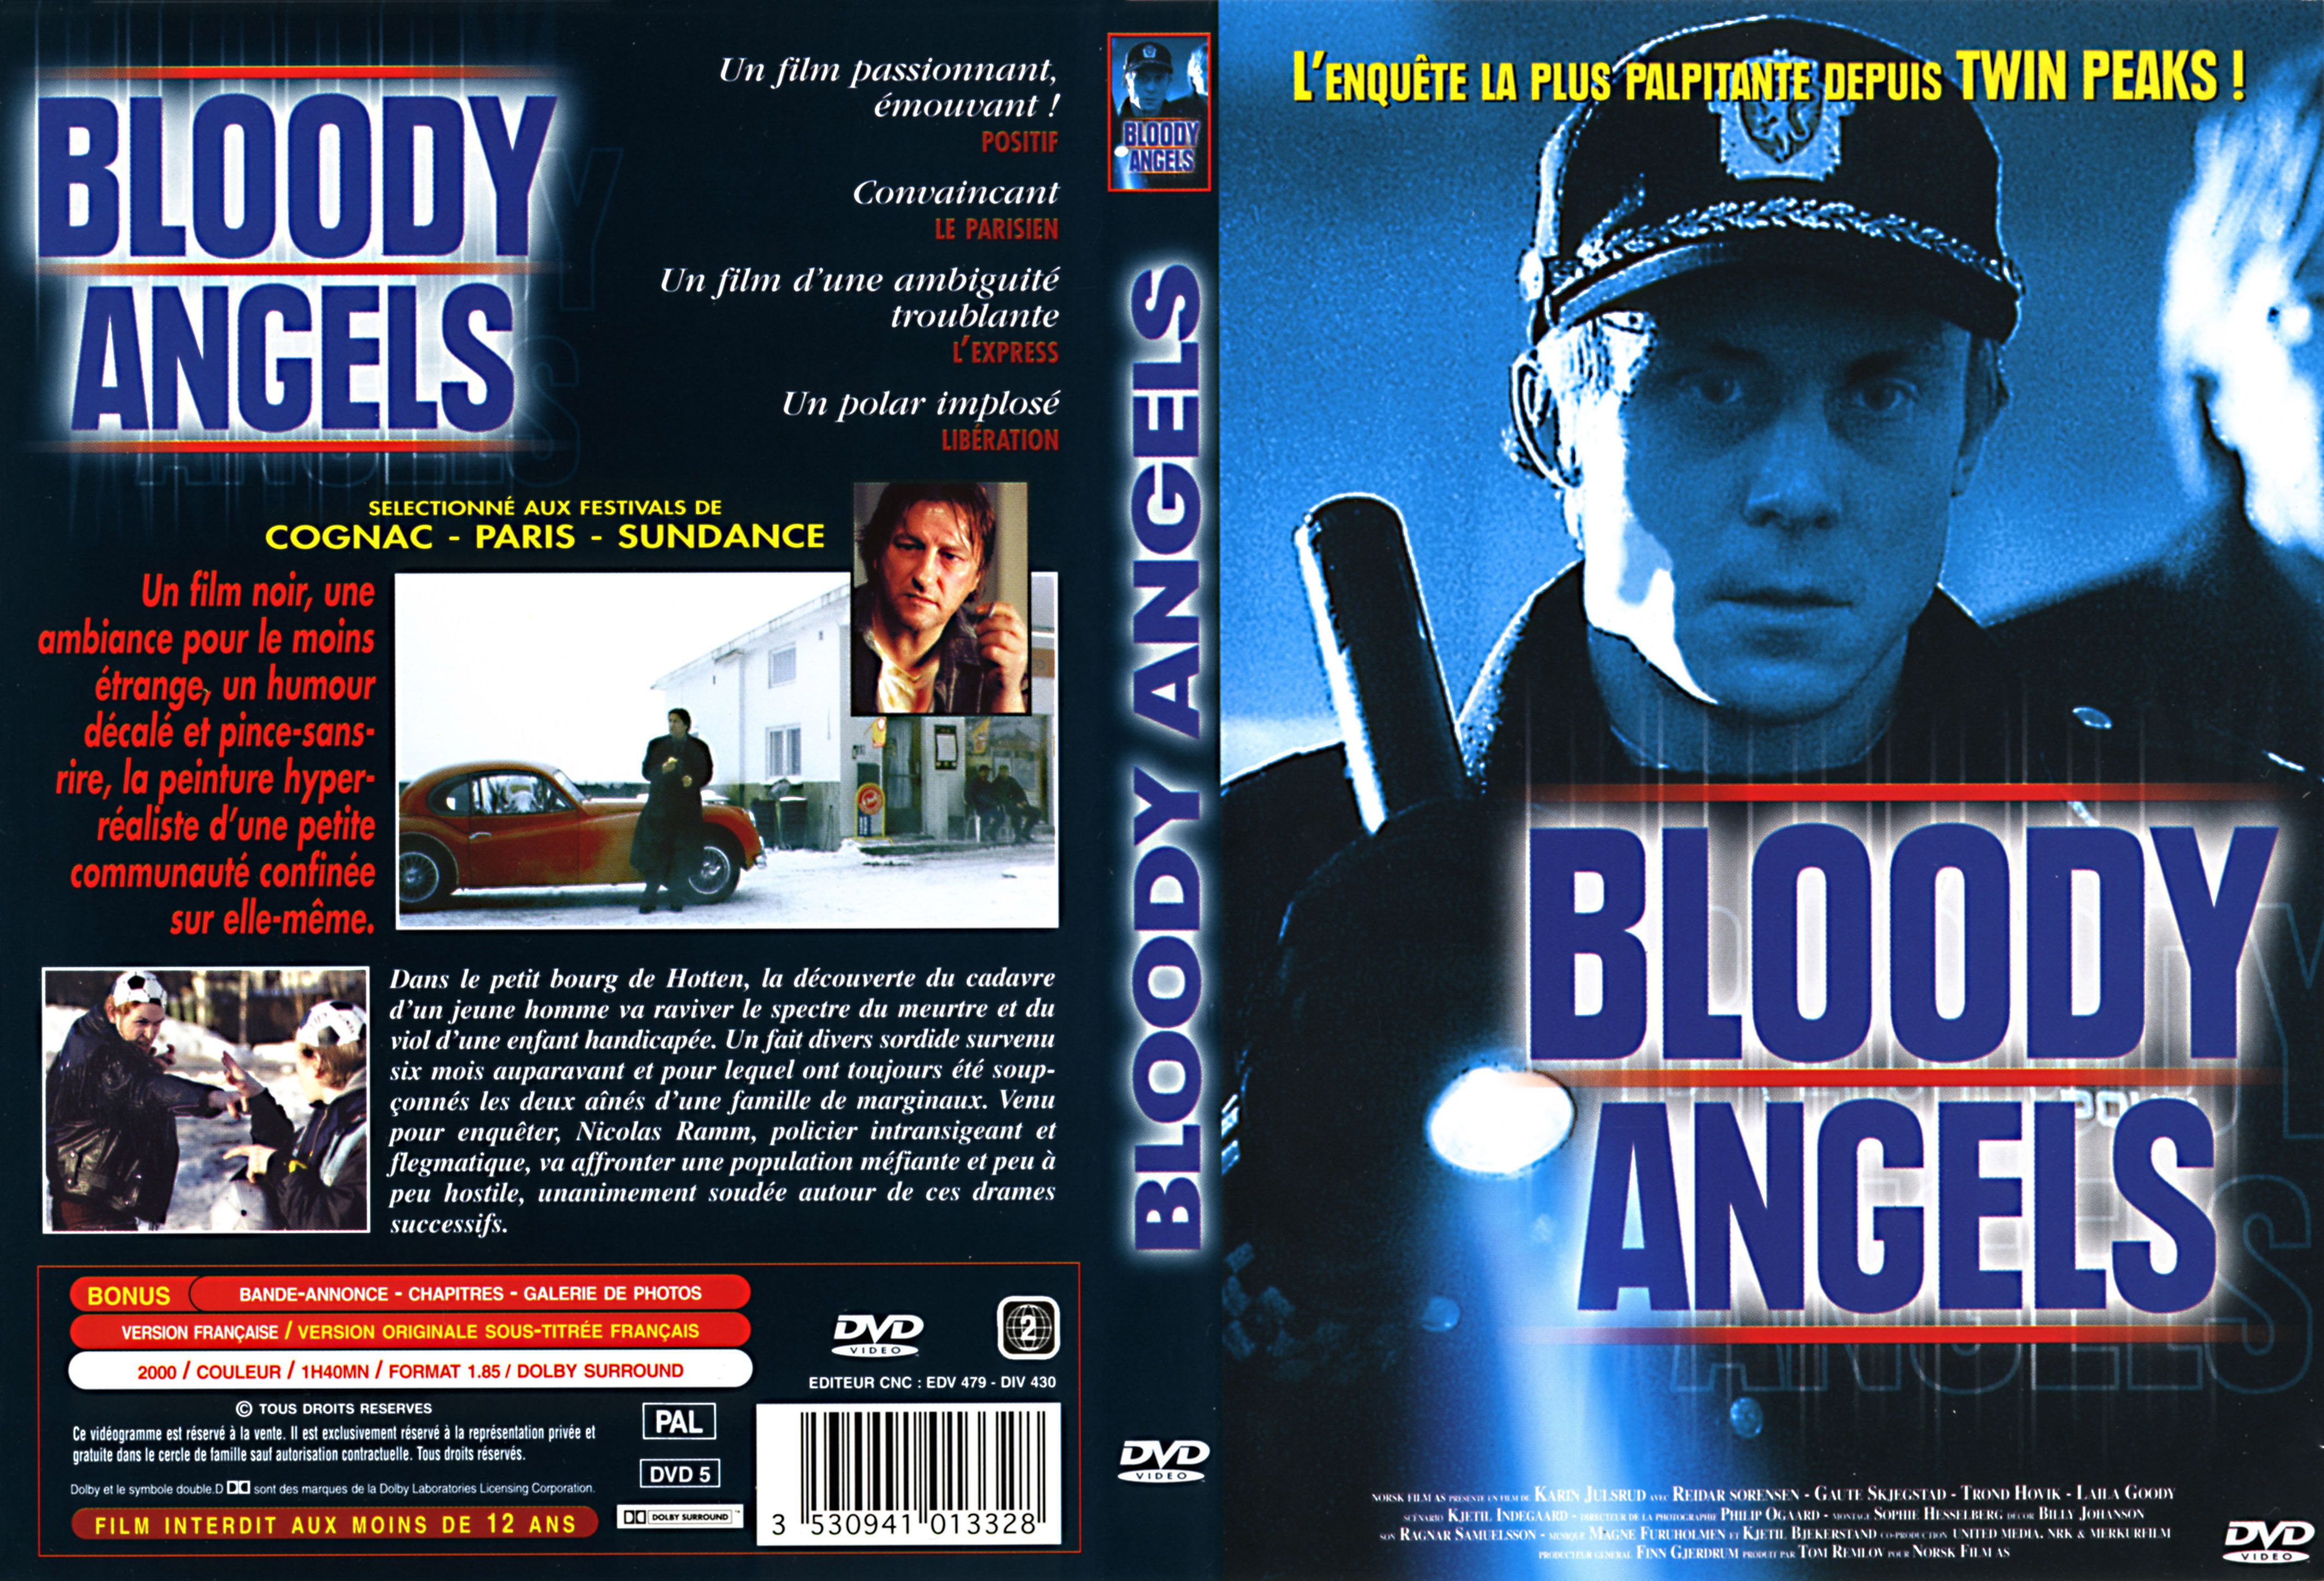 Jaquette DVD Bloody angels